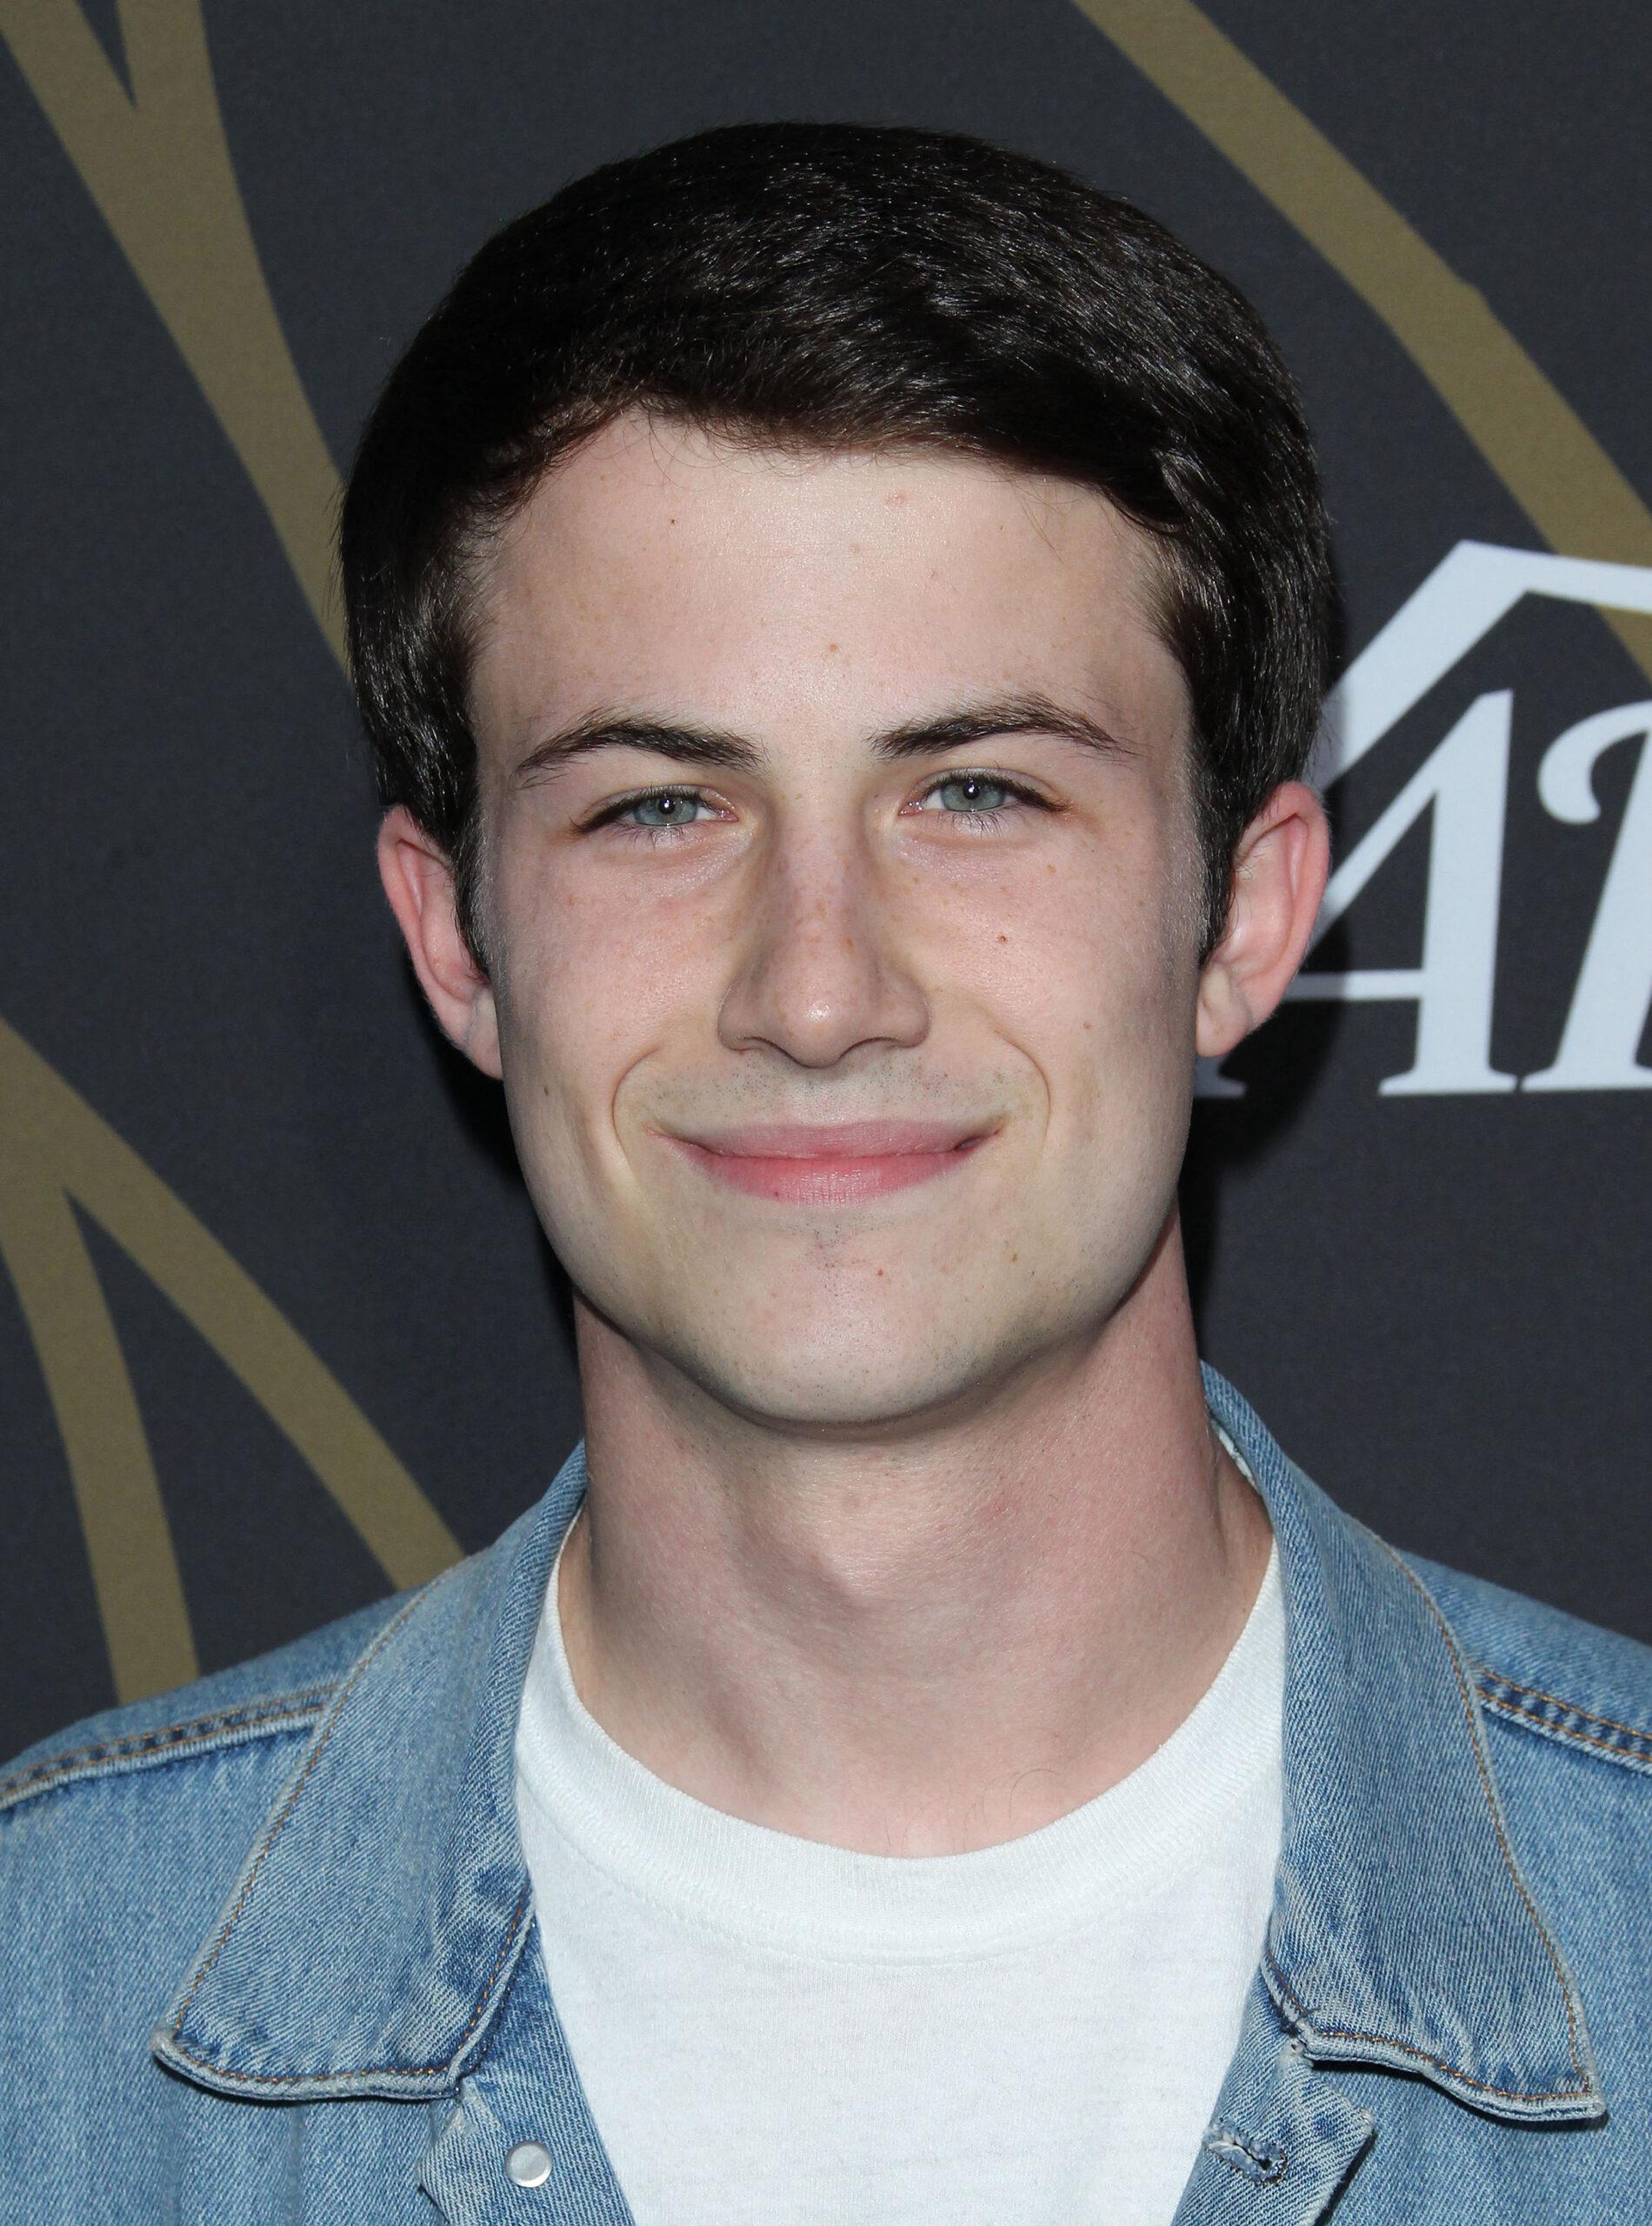 Dylan Minnette at Variety's Power of Young Hollywood